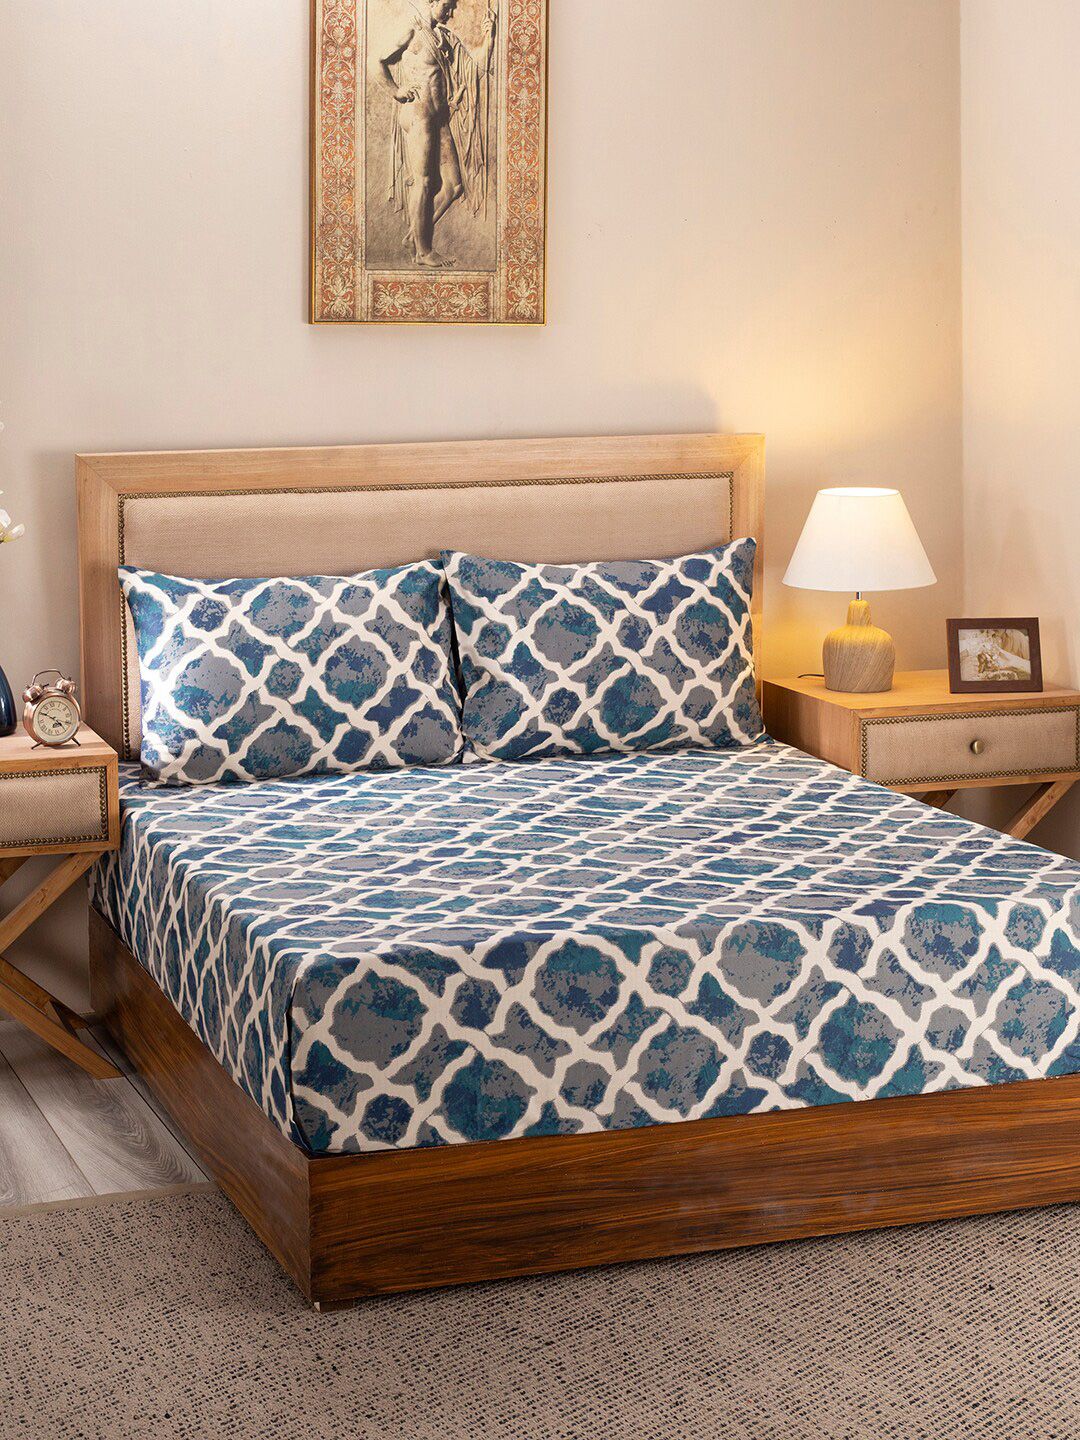 MASPAR Unisex Blue & Grey 300 TC Cotton Printed Double Bed Sheet With 2 Pillow Covers Price in India